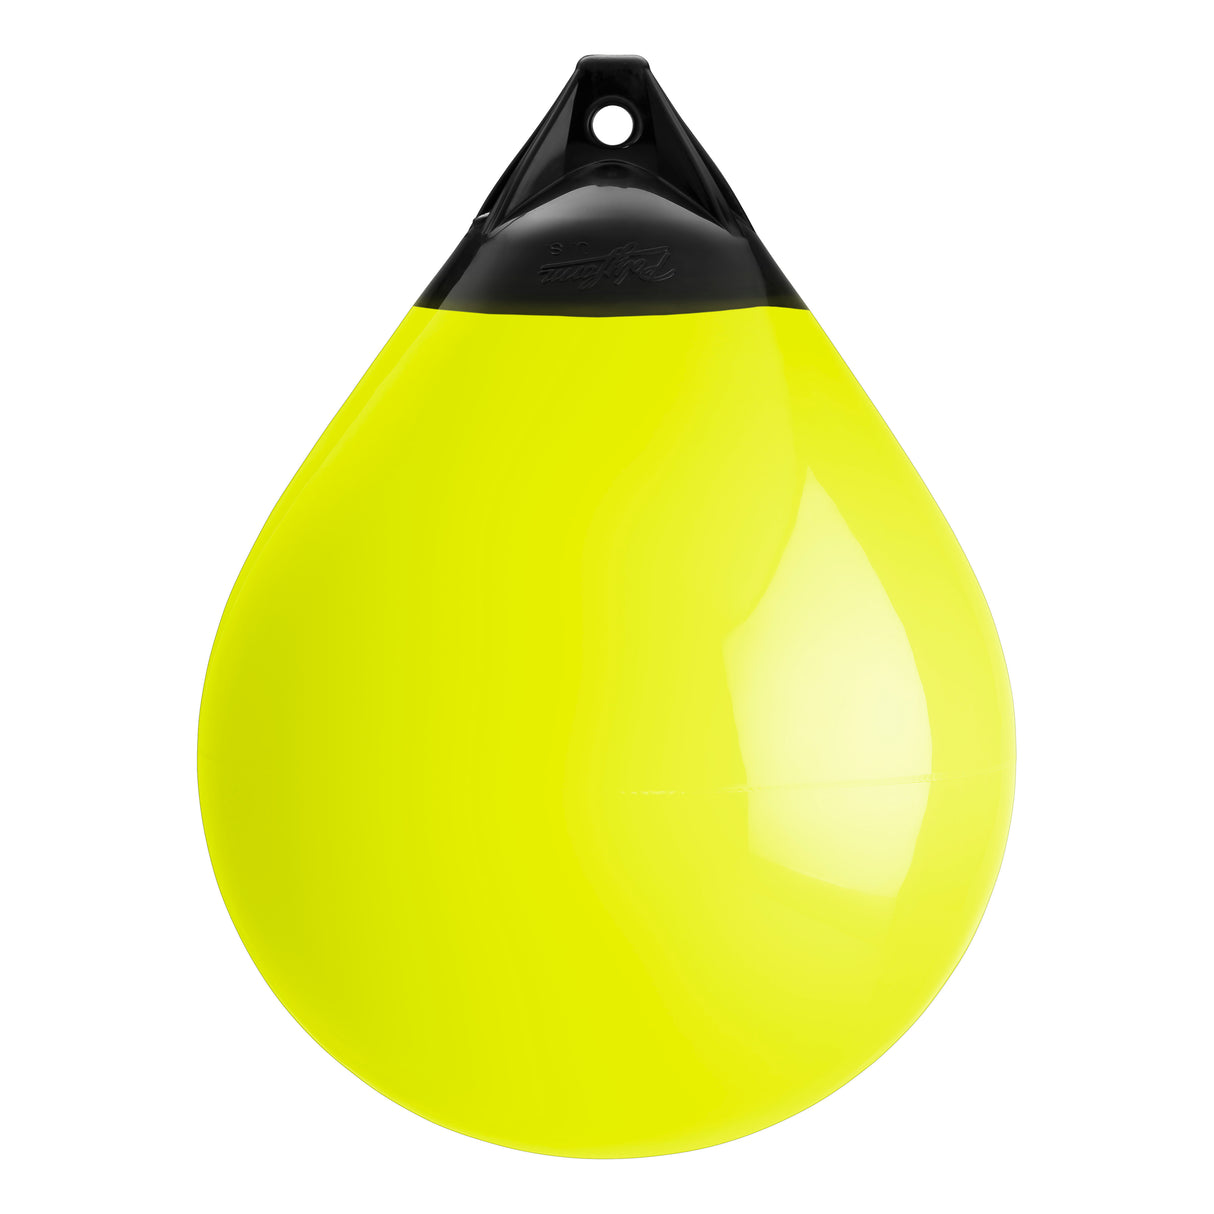 Saturn Yellow buoy with Black-Top, Polyform A-5